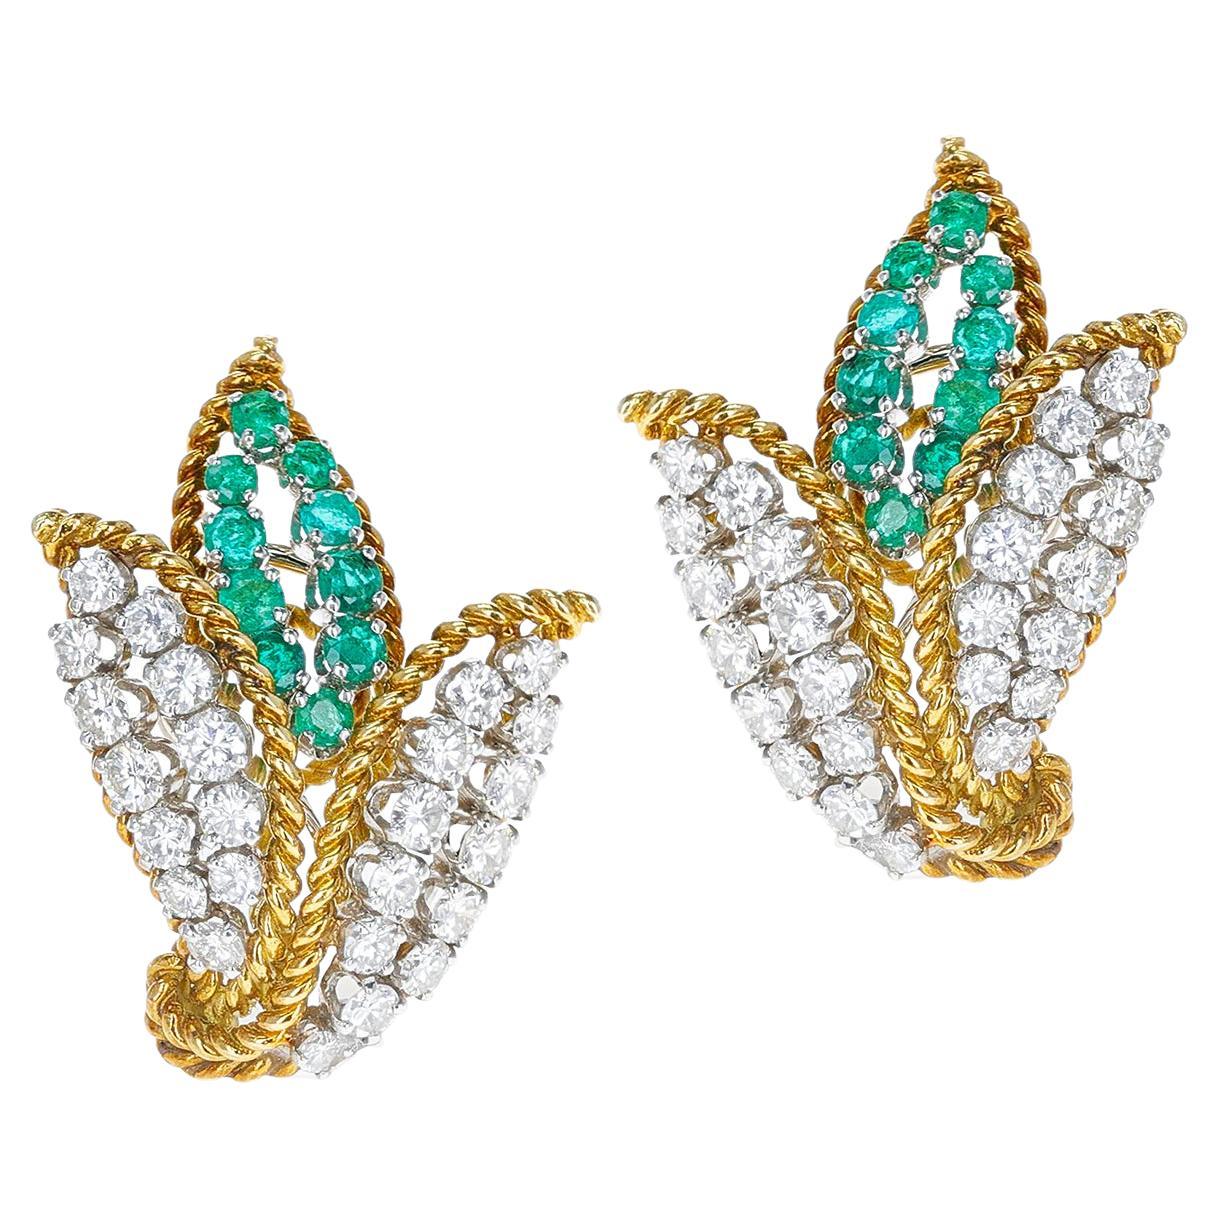 Round Diamonds and Emeralds Three Leaf Design Earrings, 18K and Platinum